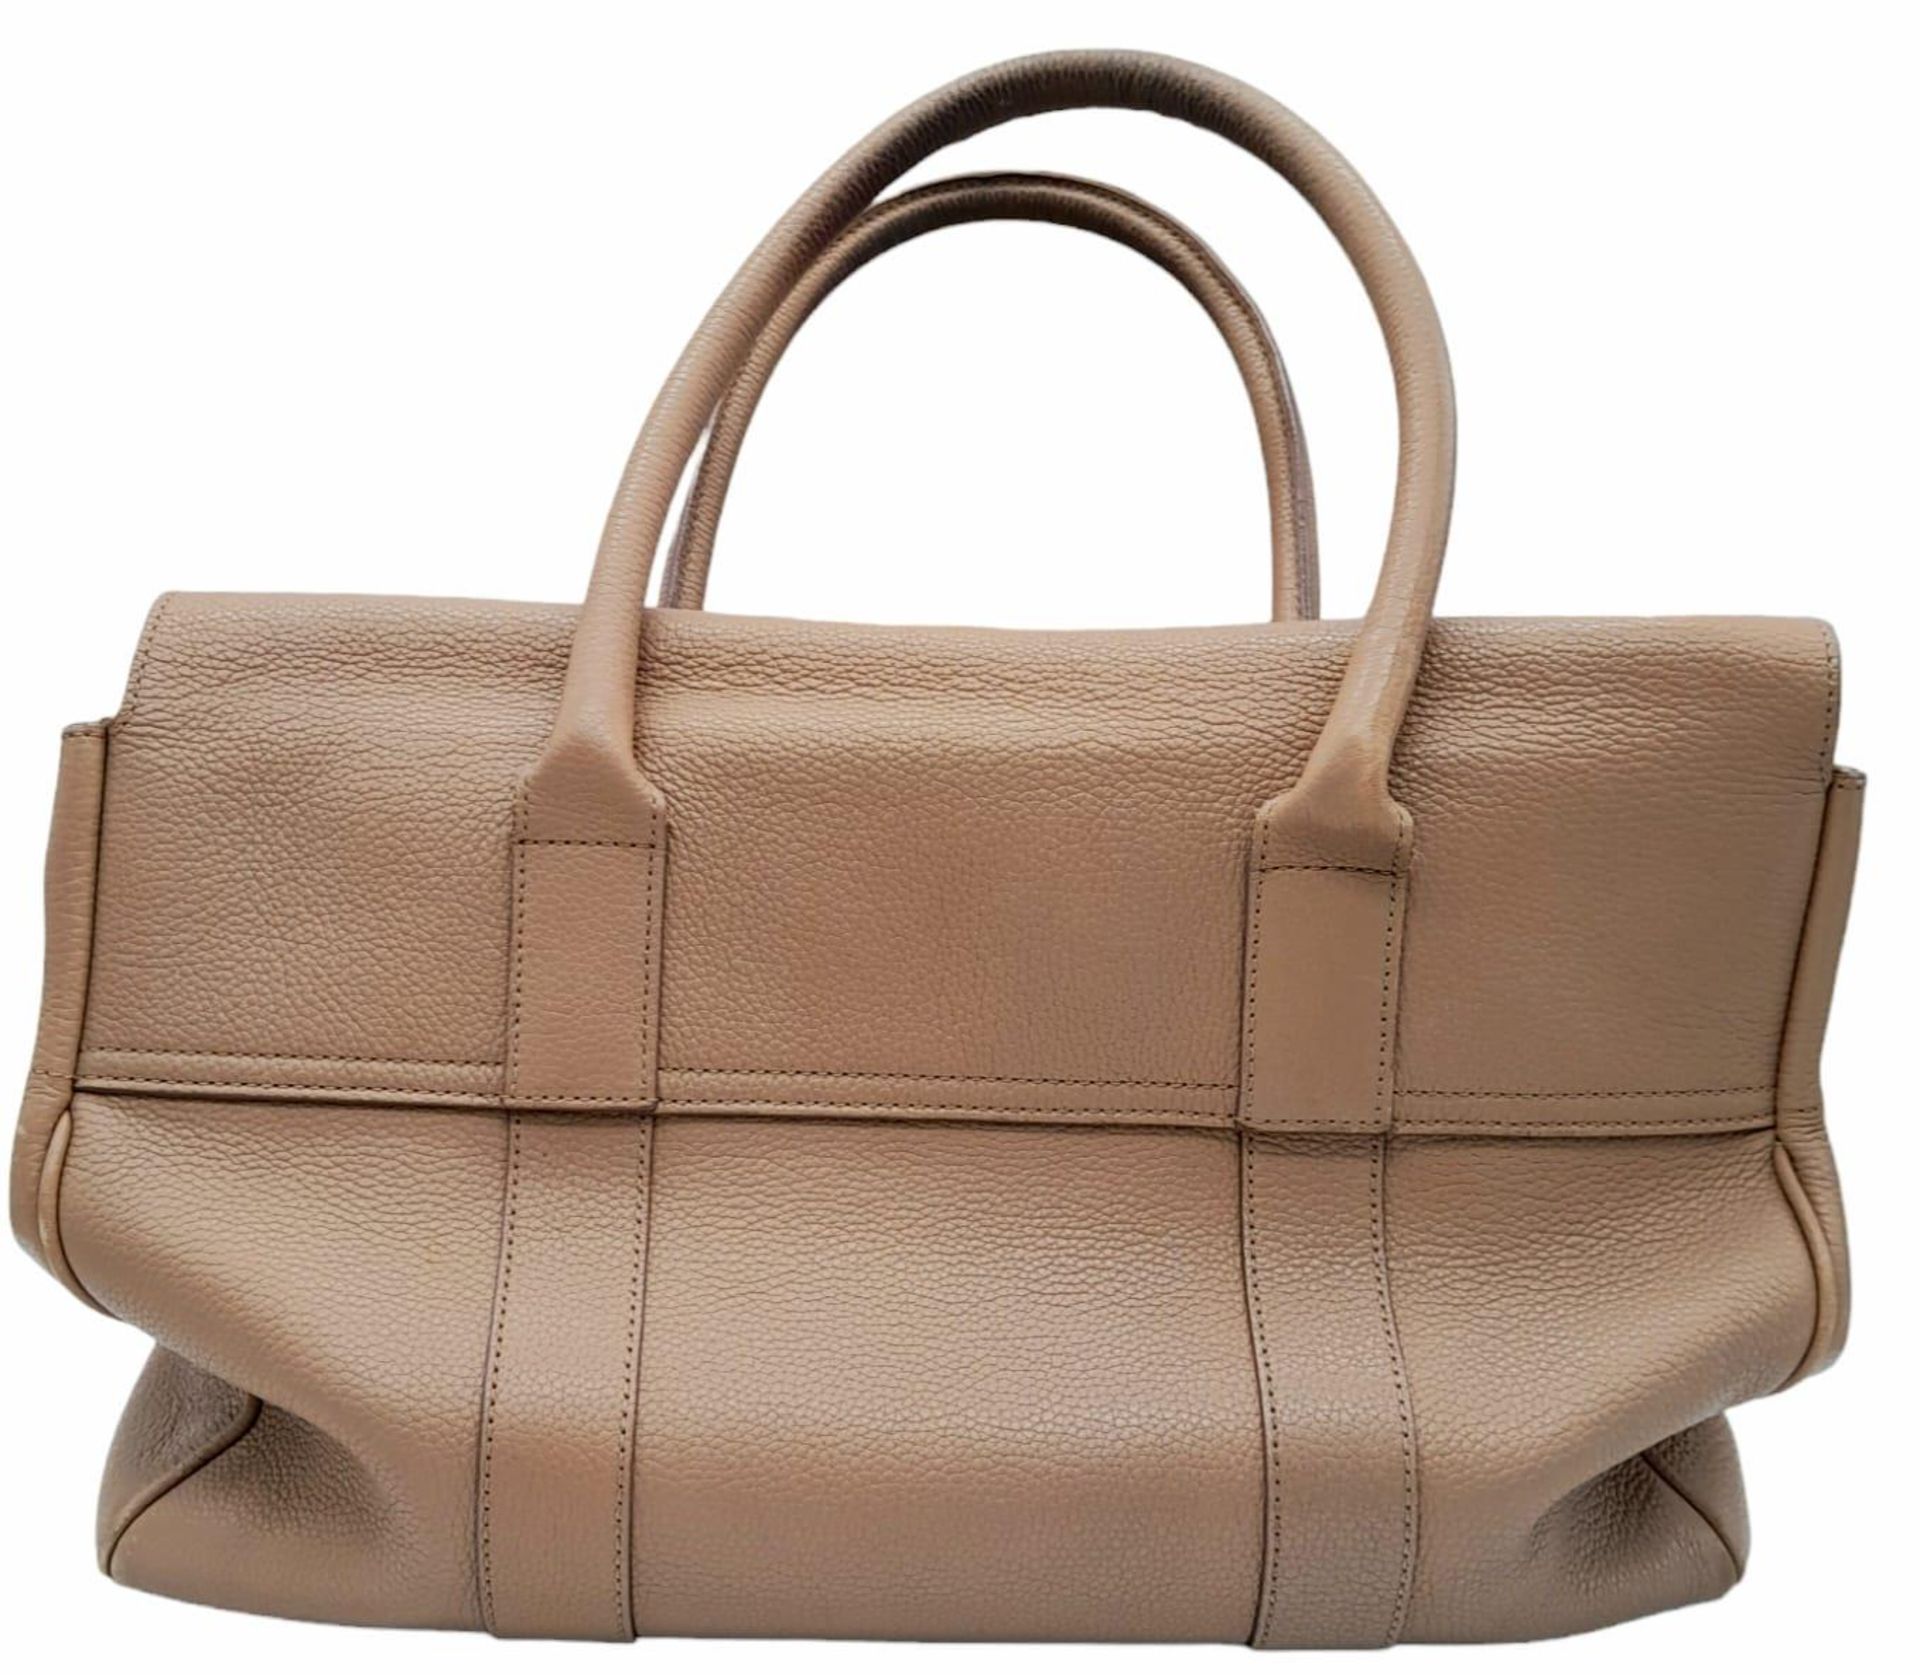 A Mulberry Light Brown Grained Leather Bayswater Satchel Bag. Silver Tone Hardware, A Turn Lock on - Image 3 of 11